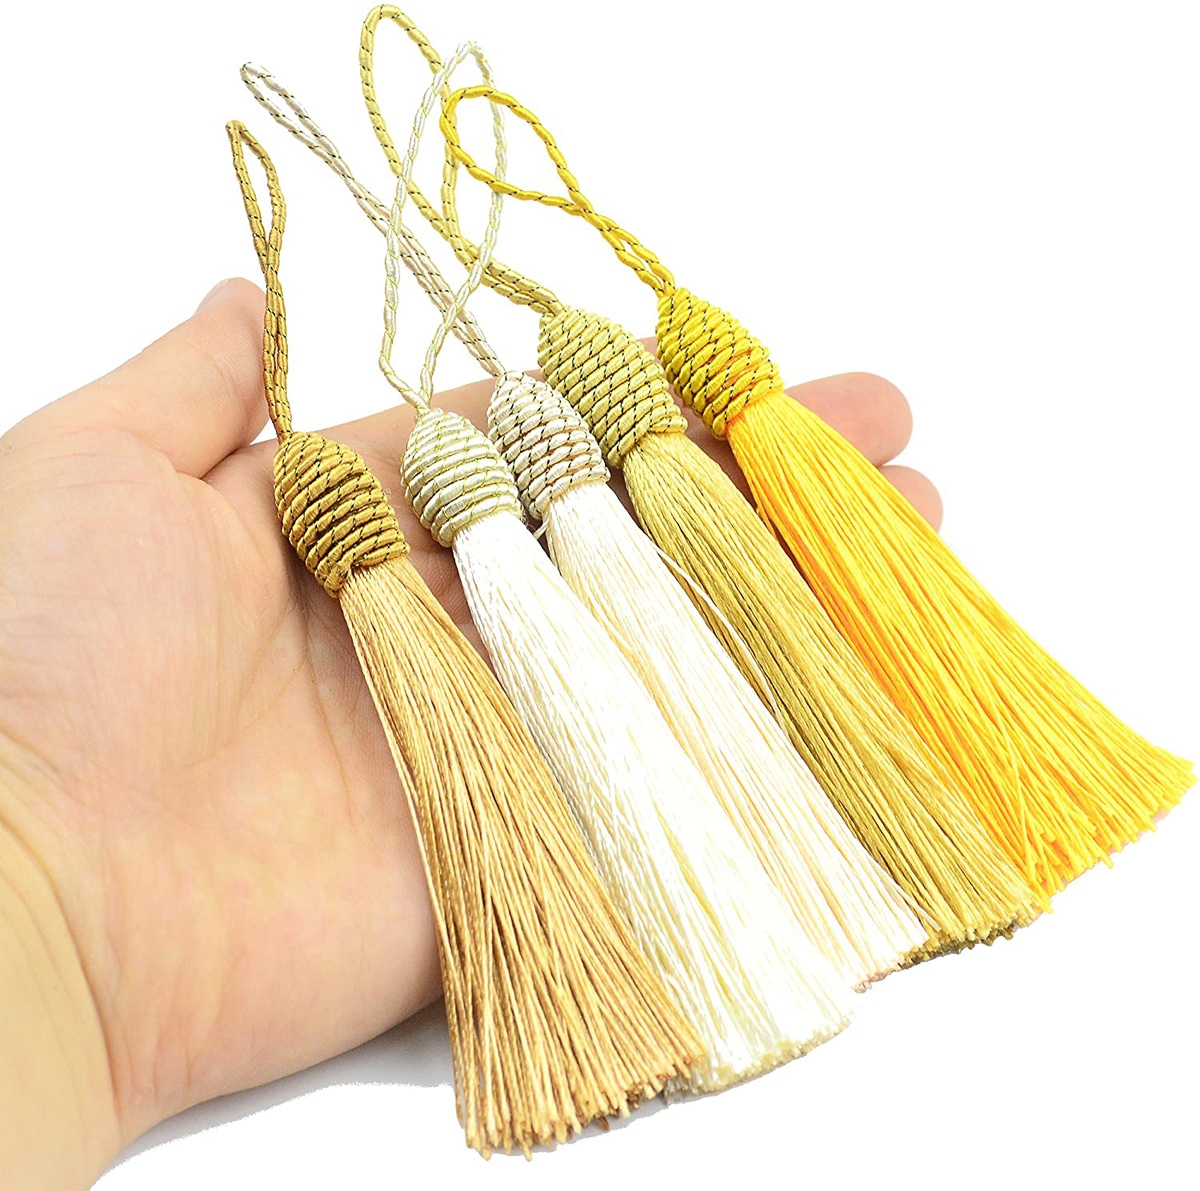 6 Inch Silky Floss Bookmark Tassels with 2-Inch Cord Loop and Small Chinese Knot for Jewelry mixed 